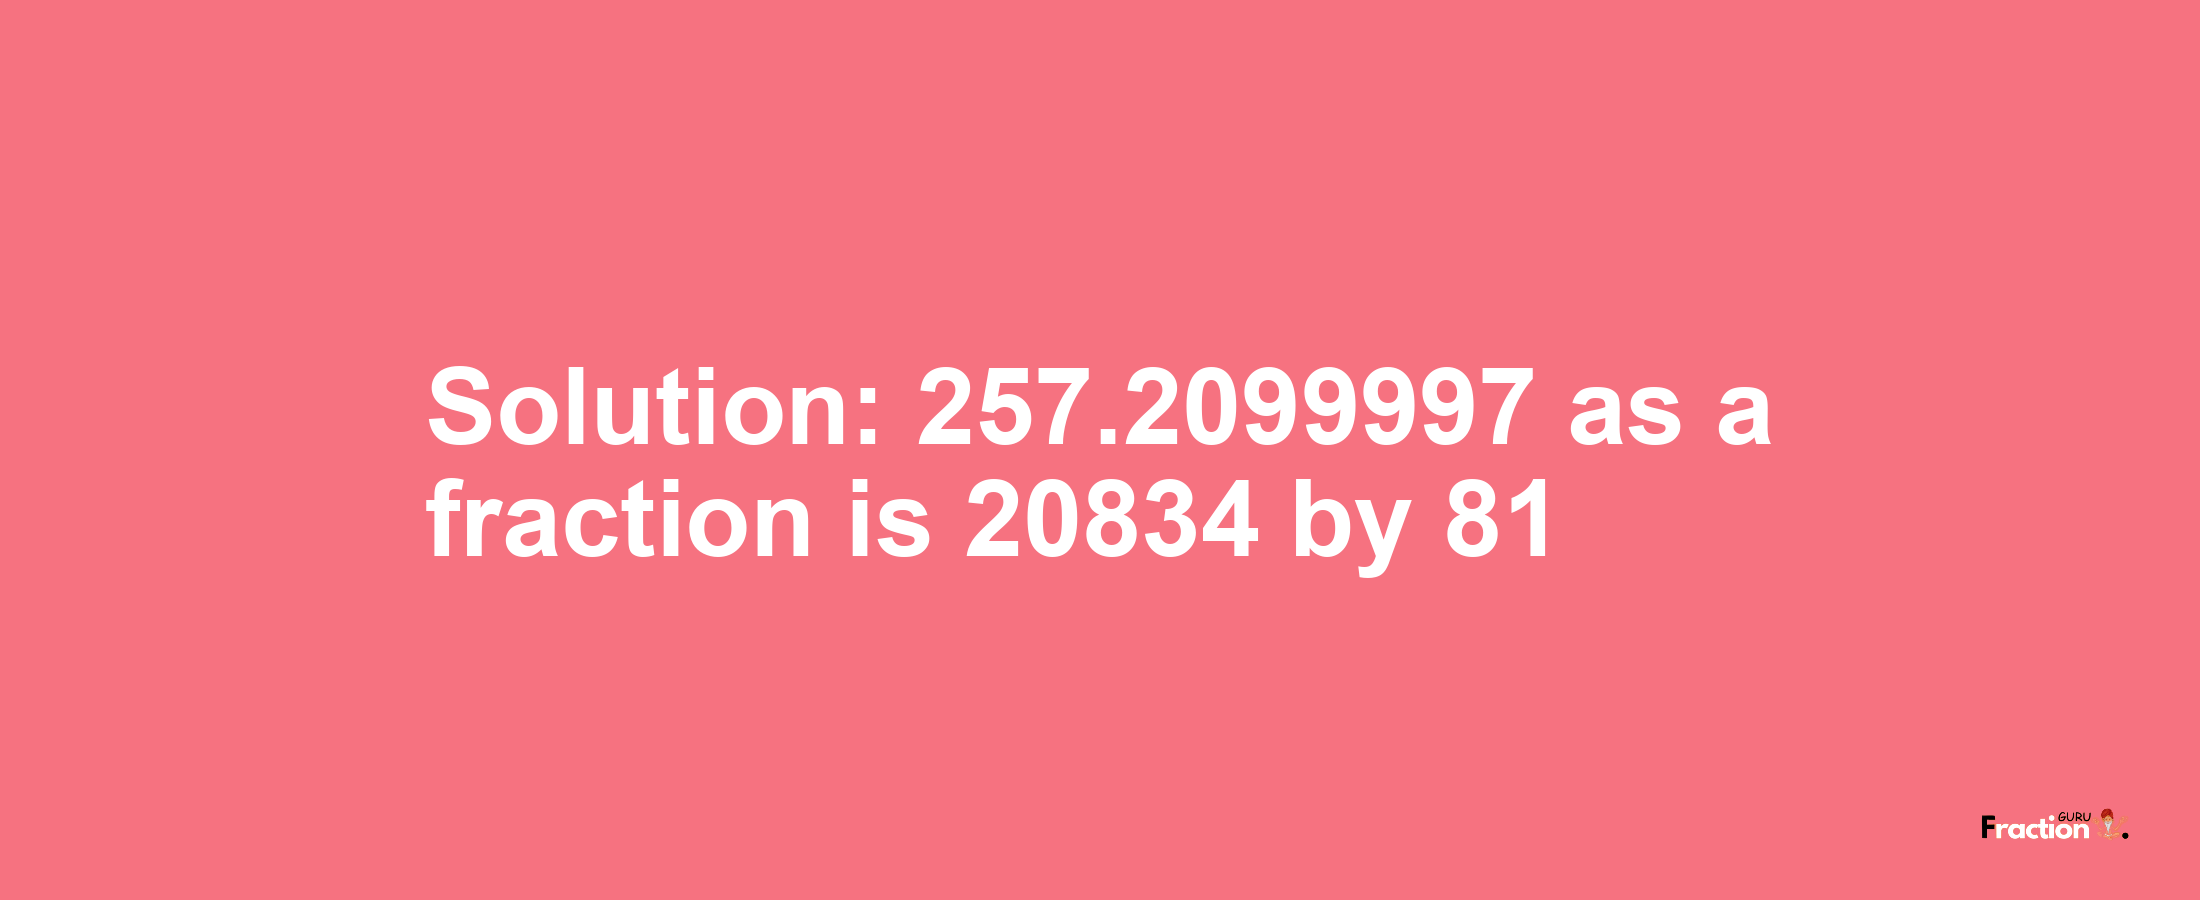 Solution:257.2099997 as a fraction is 20834/81